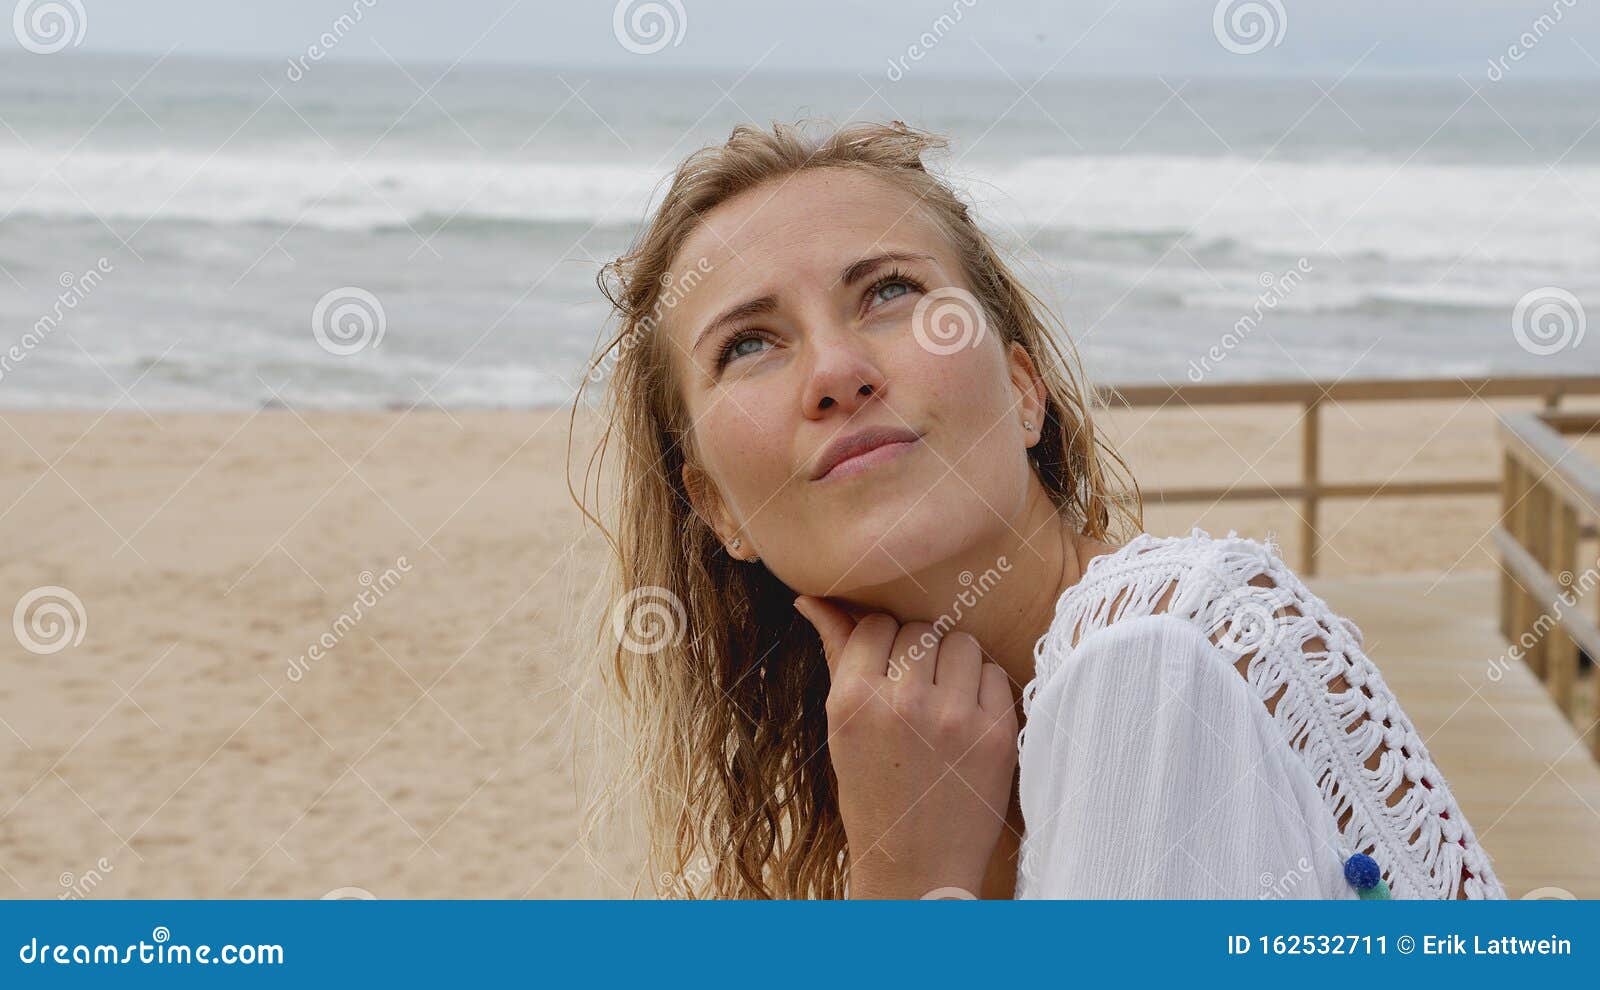 Young and Woman at the Beach Stock Image - Image of healthy, happy ...